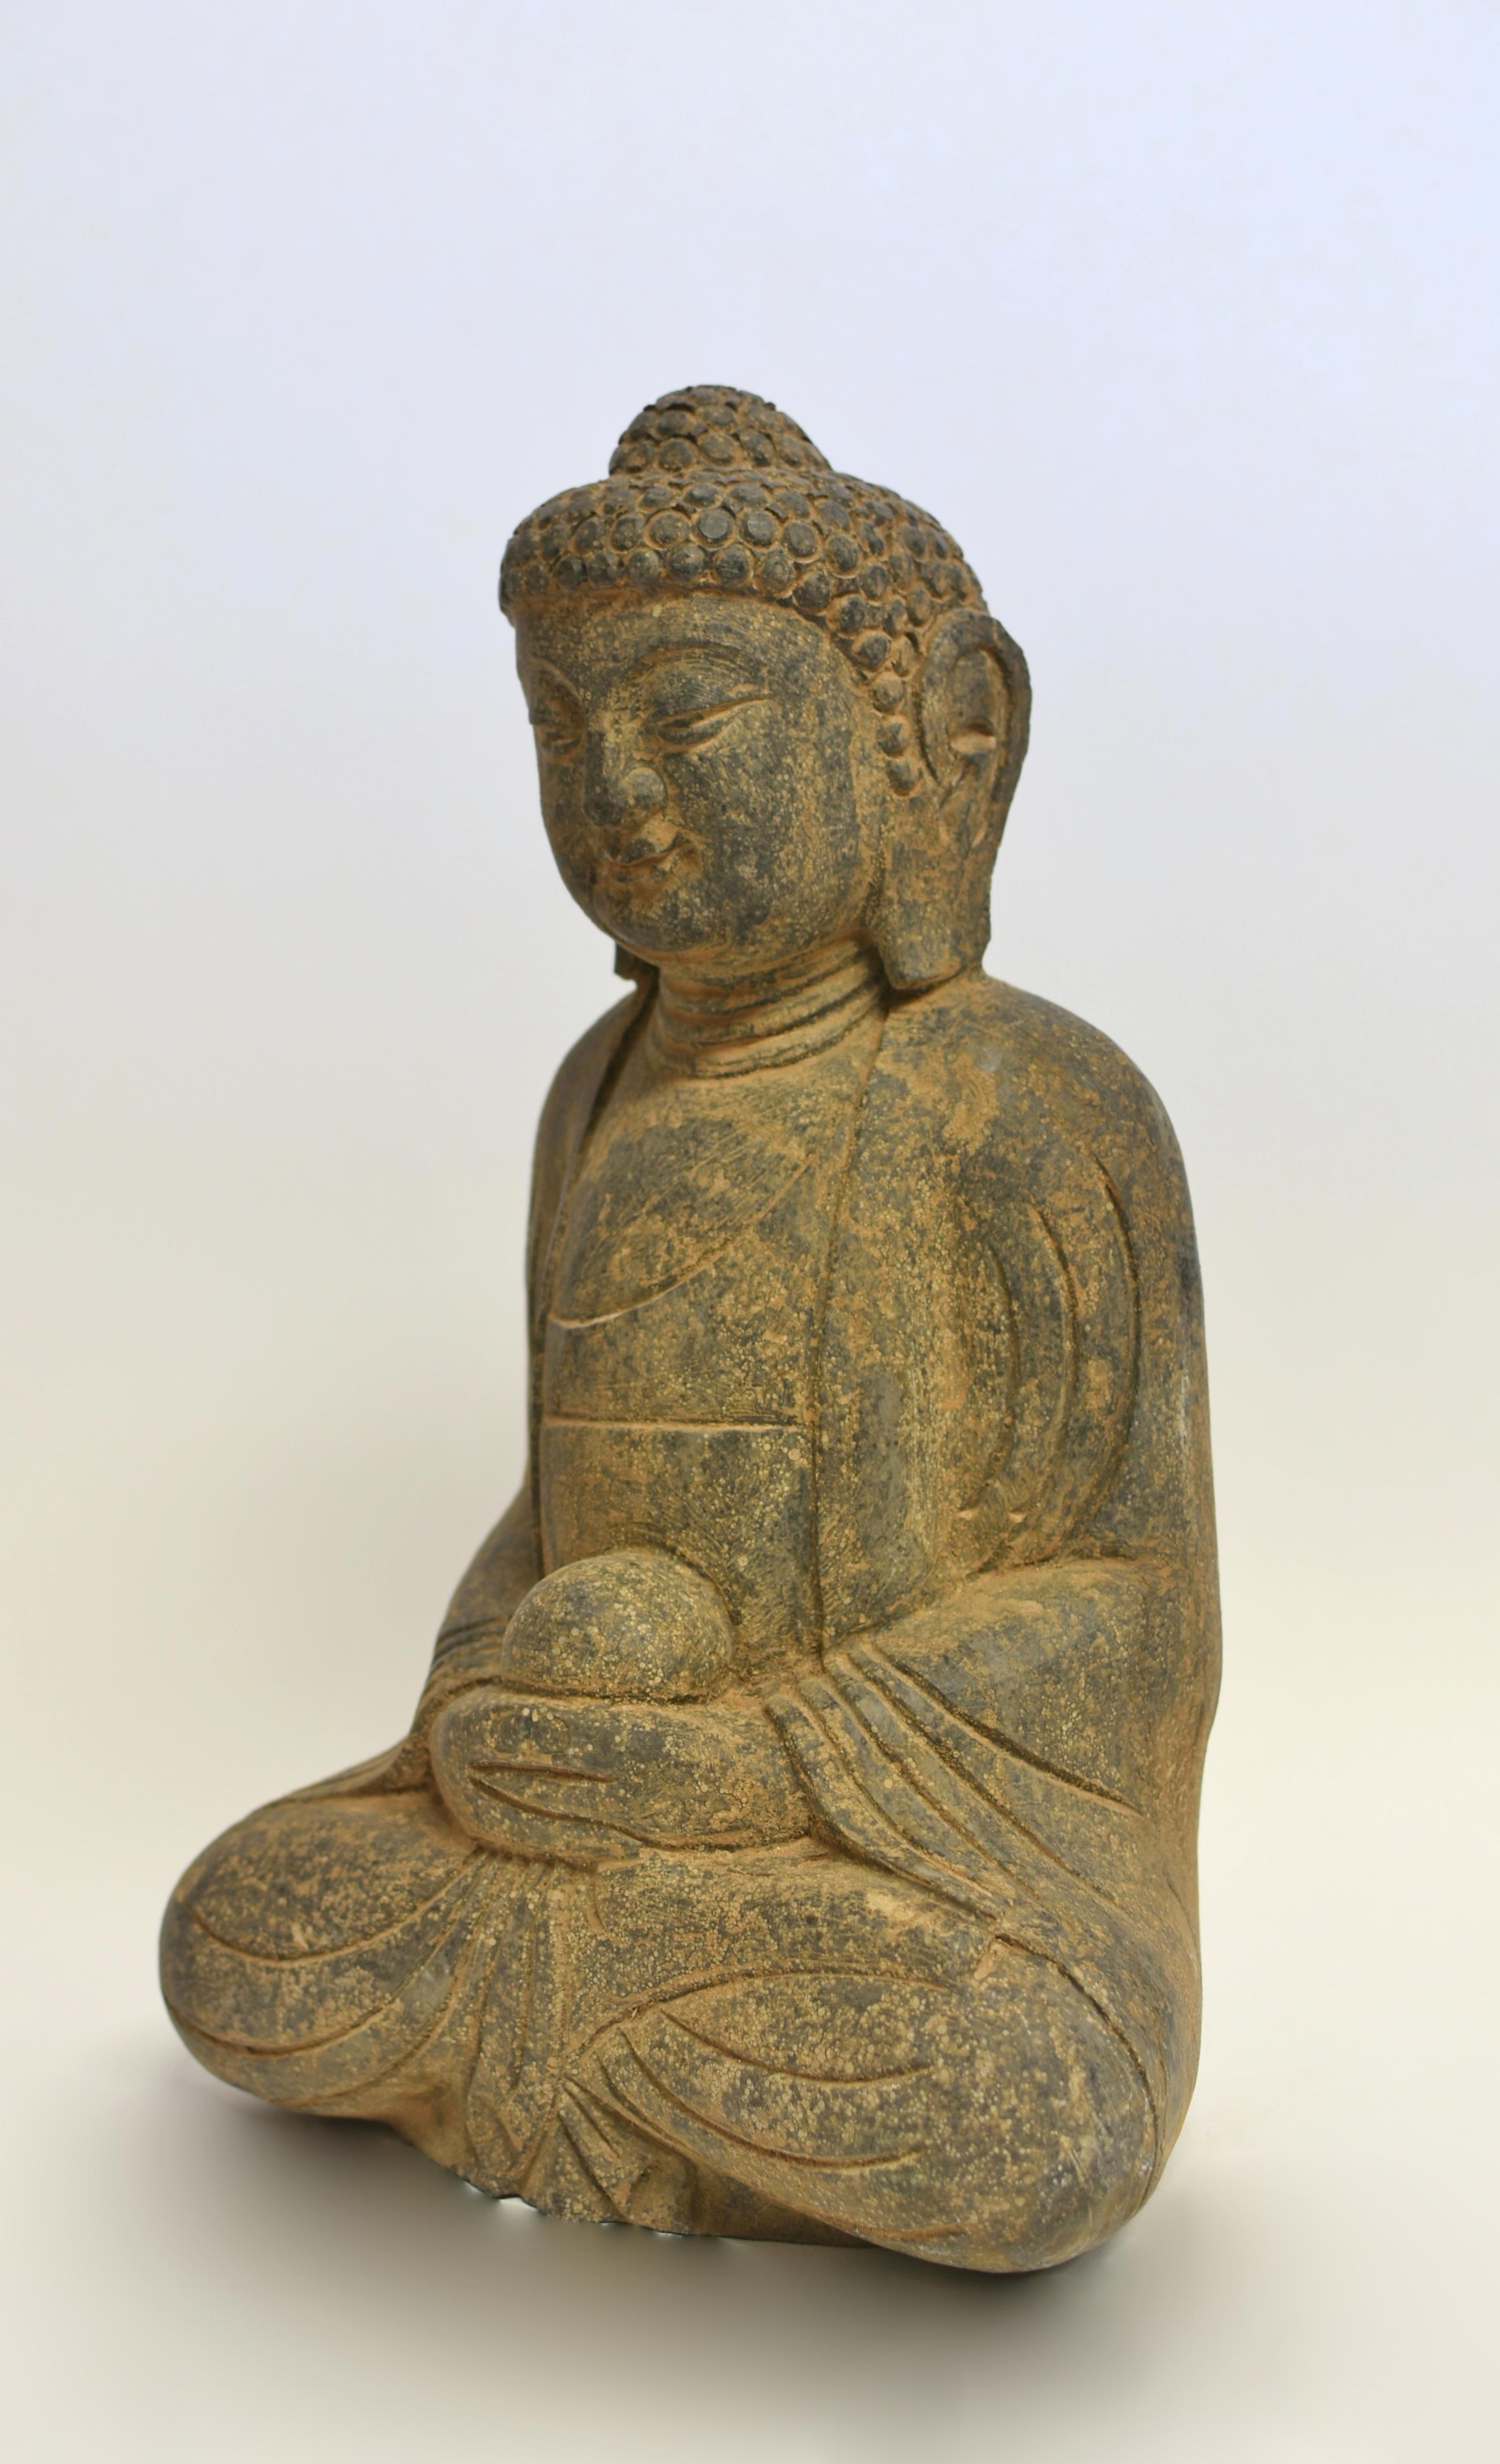 Hand-Carved Stone Buddha with Smiling Countenance 37 lb For Sale